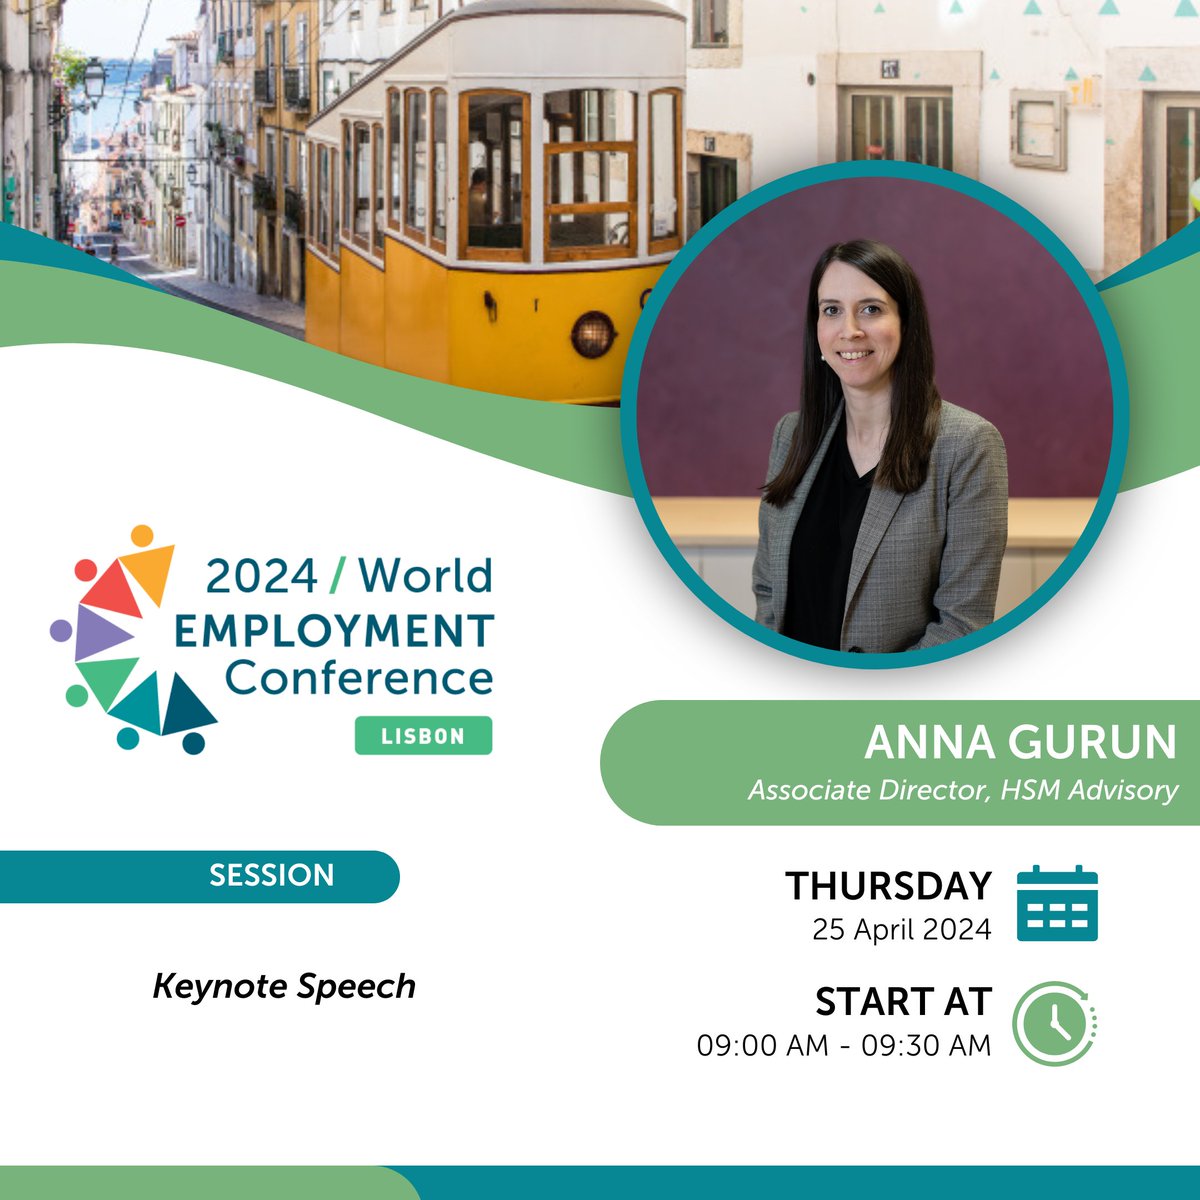 Some transformative forces are reshaping the future of #work. At #WEC2024Lisbon @AnnaGurun of @HSMAdvisory will take us on a thought-provoking journey into understanding those trends & their implications for organisations worldwide. eu.eventscloud.com/website/12979/…